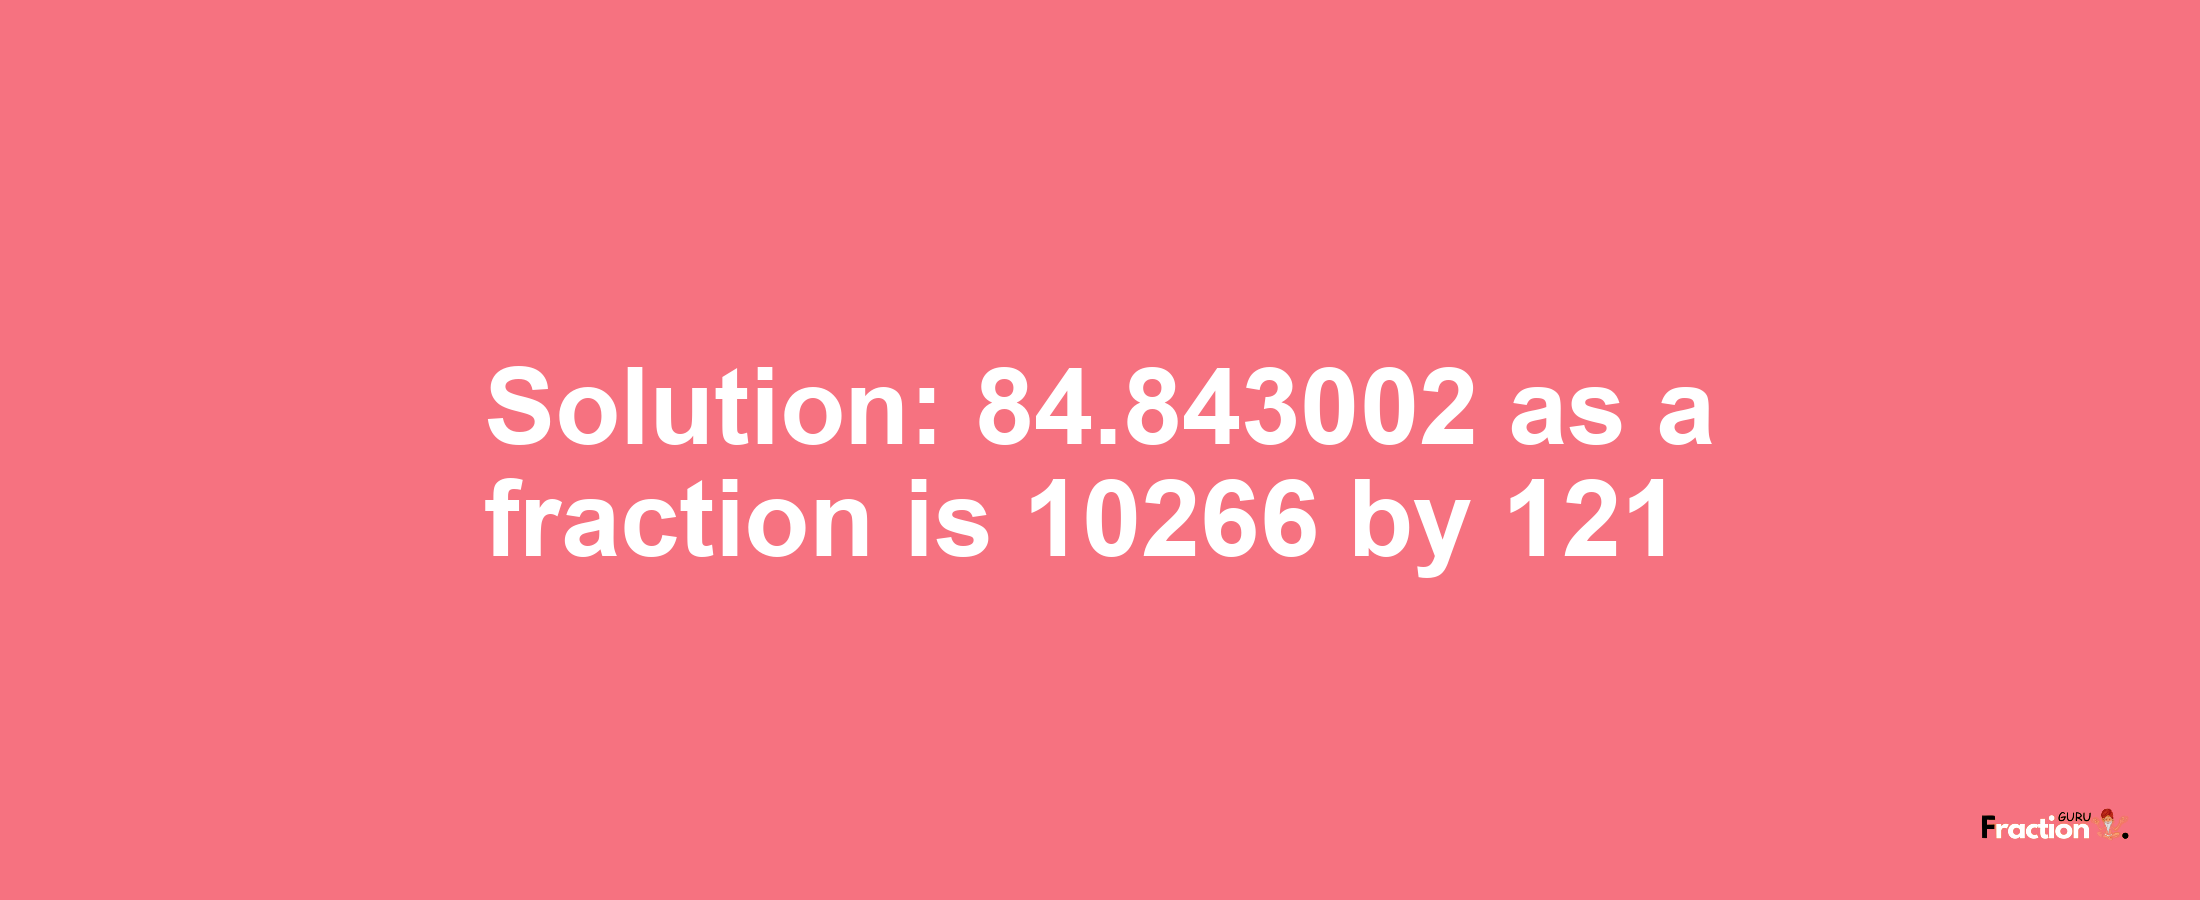 Solution:84.843002 as a fraction is 10266/121